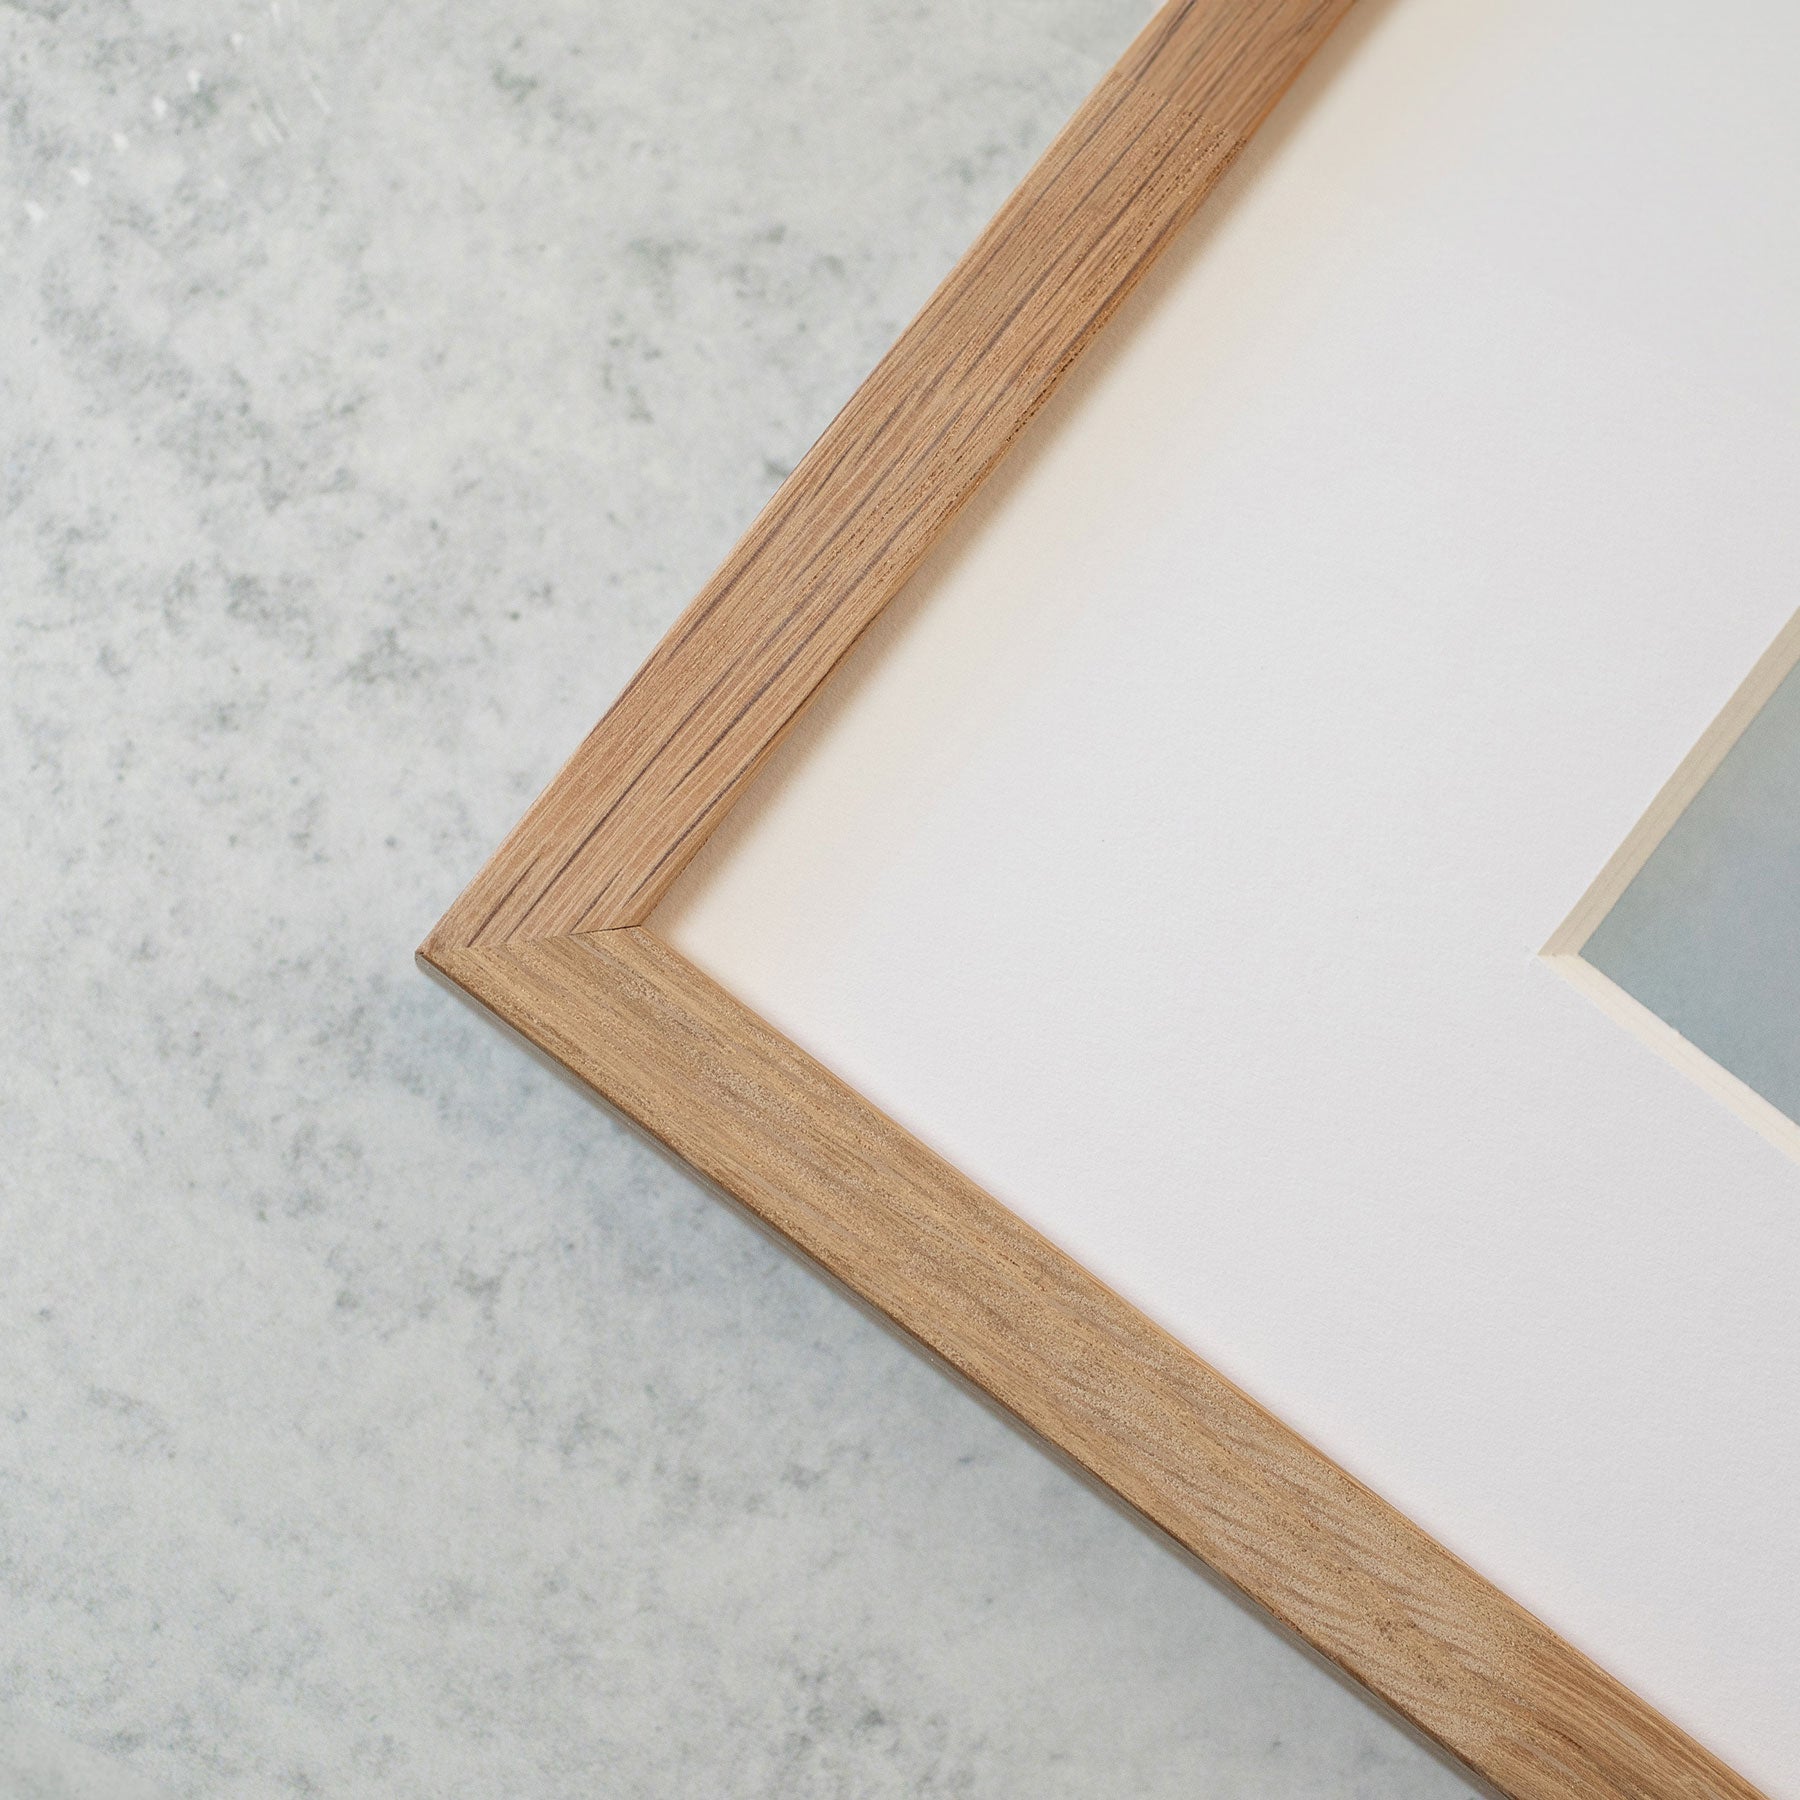 Close-up of an unframed &#39;Large White Daisy Flower Print, Bed of Petals&#39; corner on a marble background, displaying part of its light wooden texture and the edge of a white matte border inside by Offley Green.